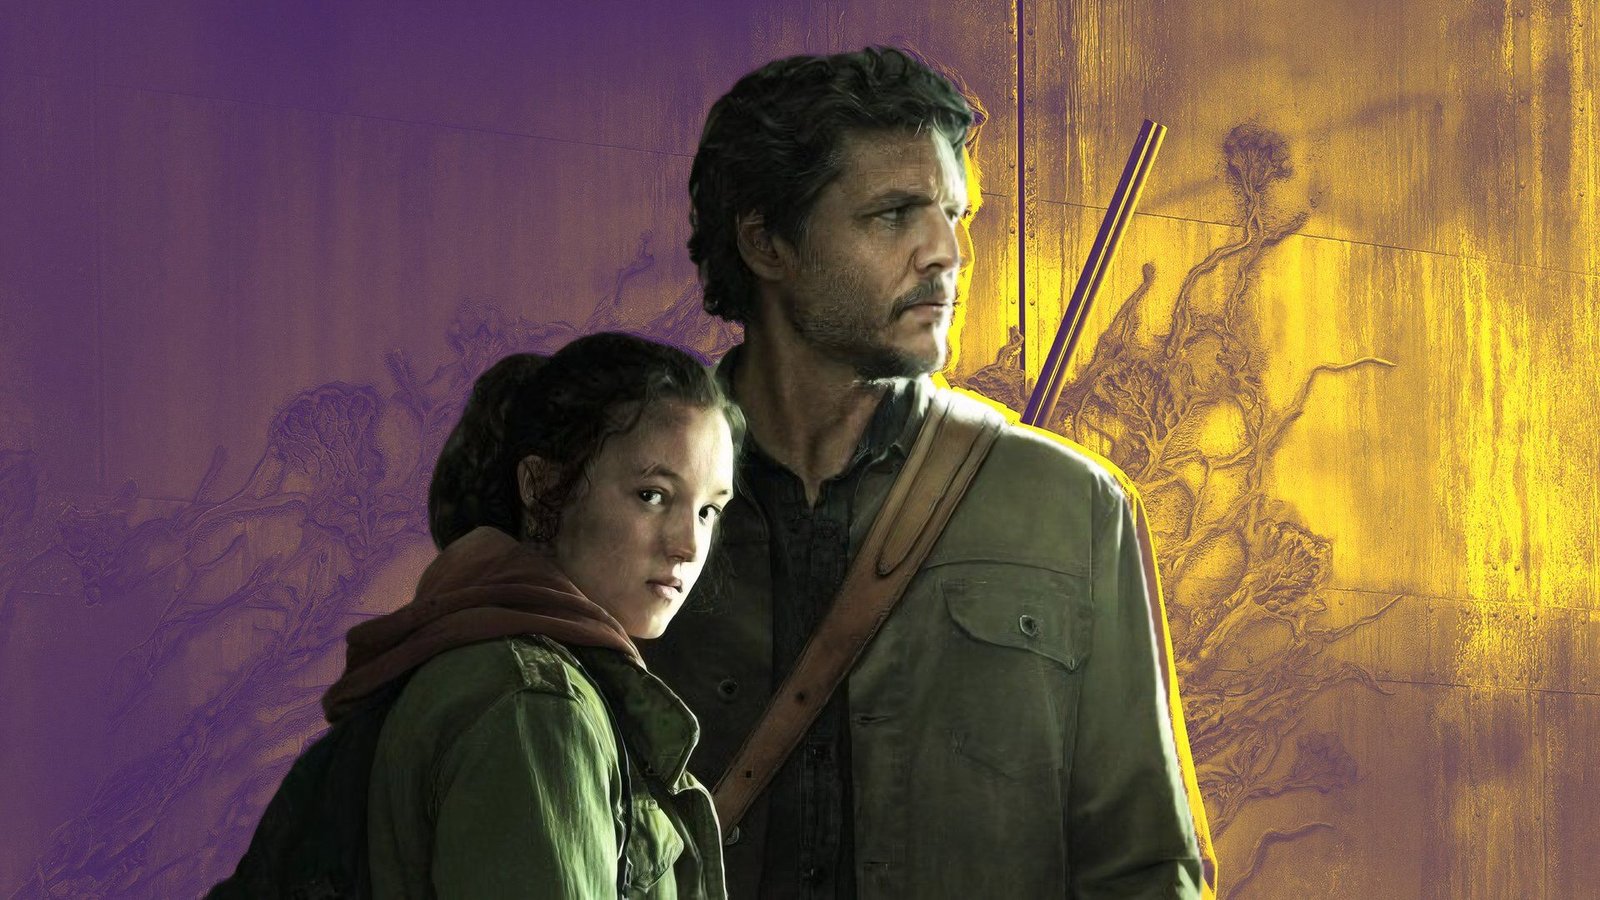 Last of Us Director Calls Out 'Inaccuracies' in Controversial Interview